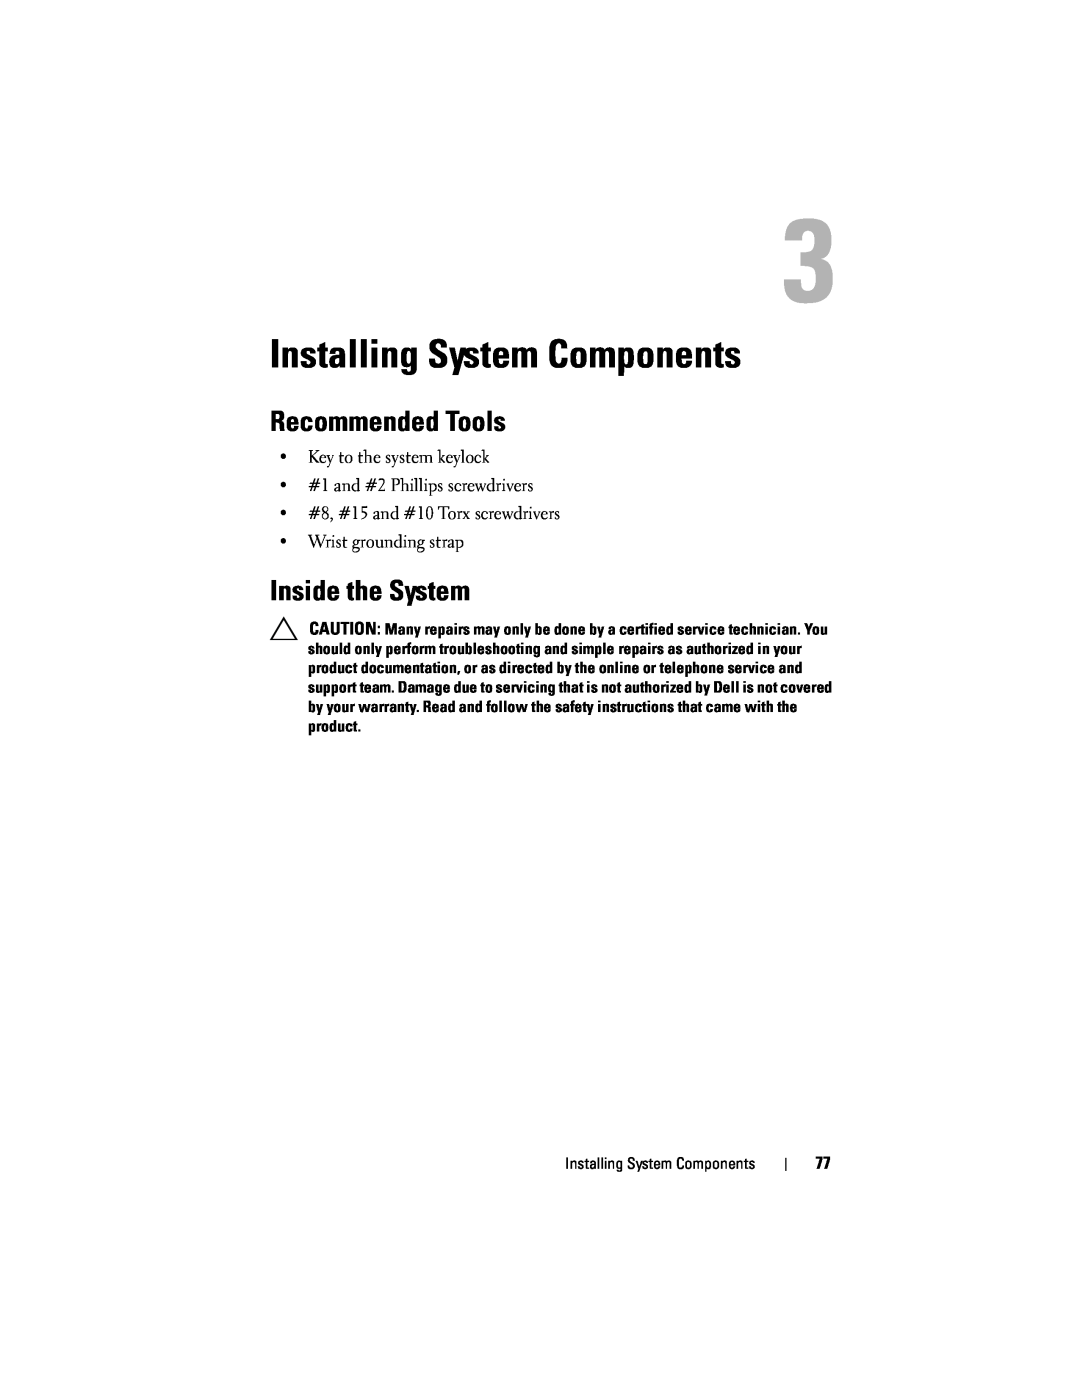 Dell R610 owner manual Installing System Components, Recommended Tools, Inside the System 